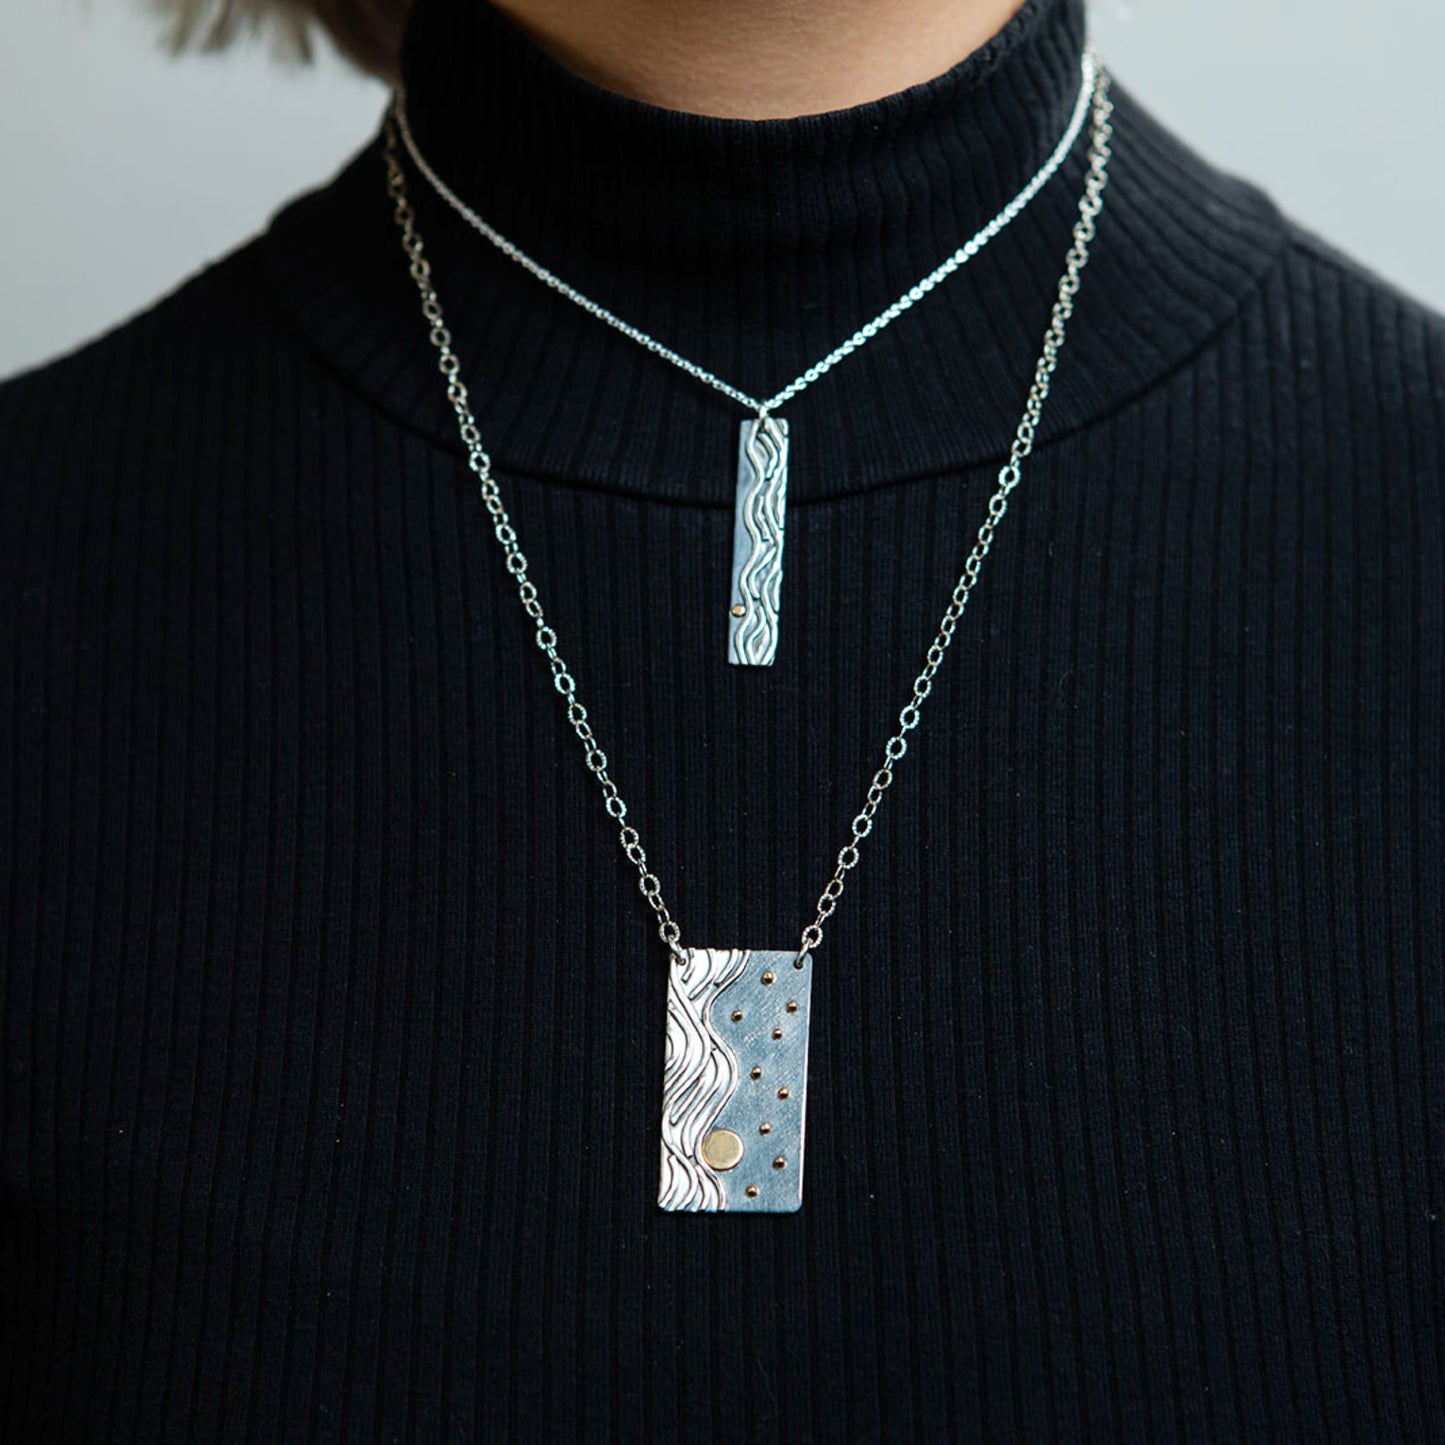 Closeup of model wearing Reflections necklaces